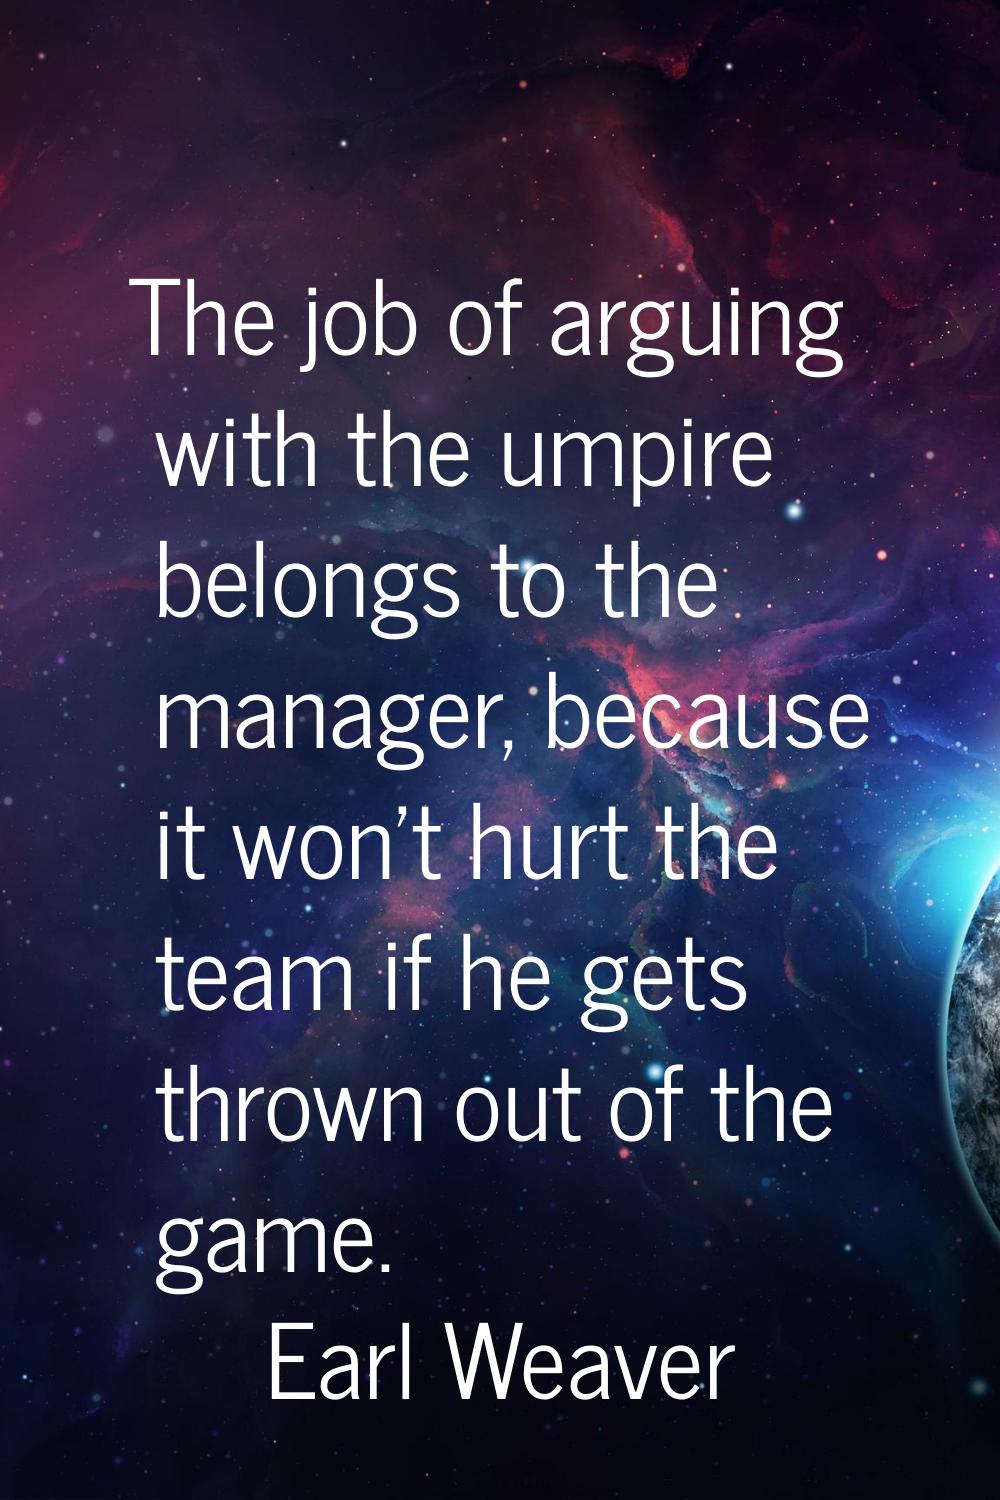 The job of arguing with the umpire belongs to the manager, because it won't hurt the team if he get